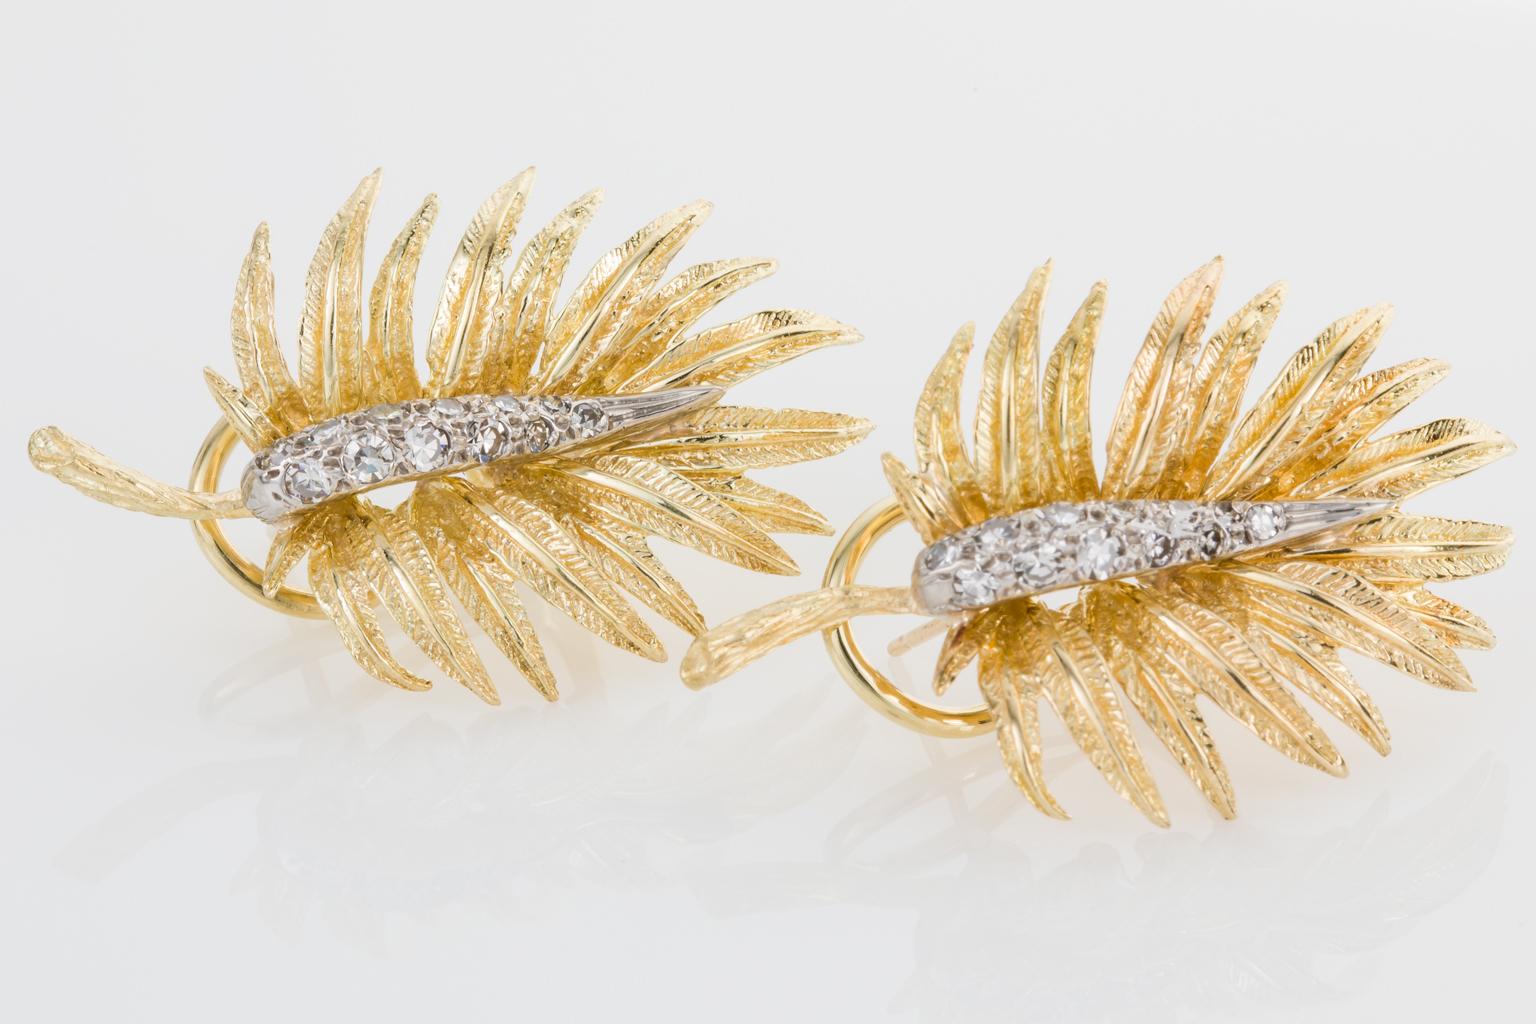 A naturalistic pair of earrings depicting a textured fern leaf in 18k yellow gold. The gold work is divine with the leaf fronds showing all the same natural elements with the vein running through the centre of each frond and textured detailing on